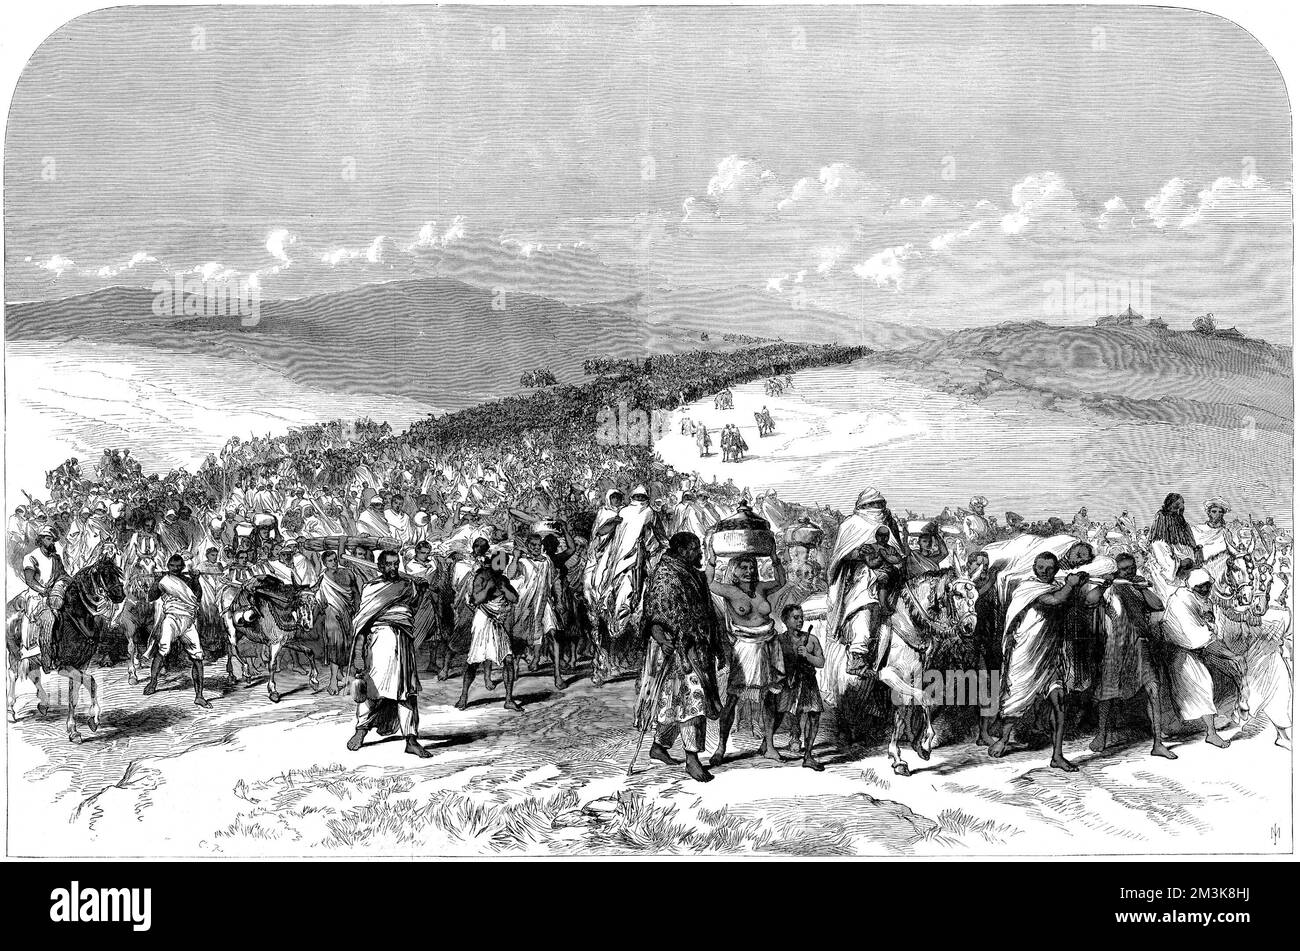 The British 1868 Expedition to Abyssinia was a punitive expedition against King Theodore, after he had imprisoned missionaries and representatives of the British Government. After the British had bombarded Magdala and defeated the Abyssinian Army, King Theodore shot himself. This image shows the exodus of the population, including thousands of the men of King Theodore's defeated army with their wives and children. In total it is thought that 30,000 people were part of this flight.     Date: 13th June 1868 Stock Photo